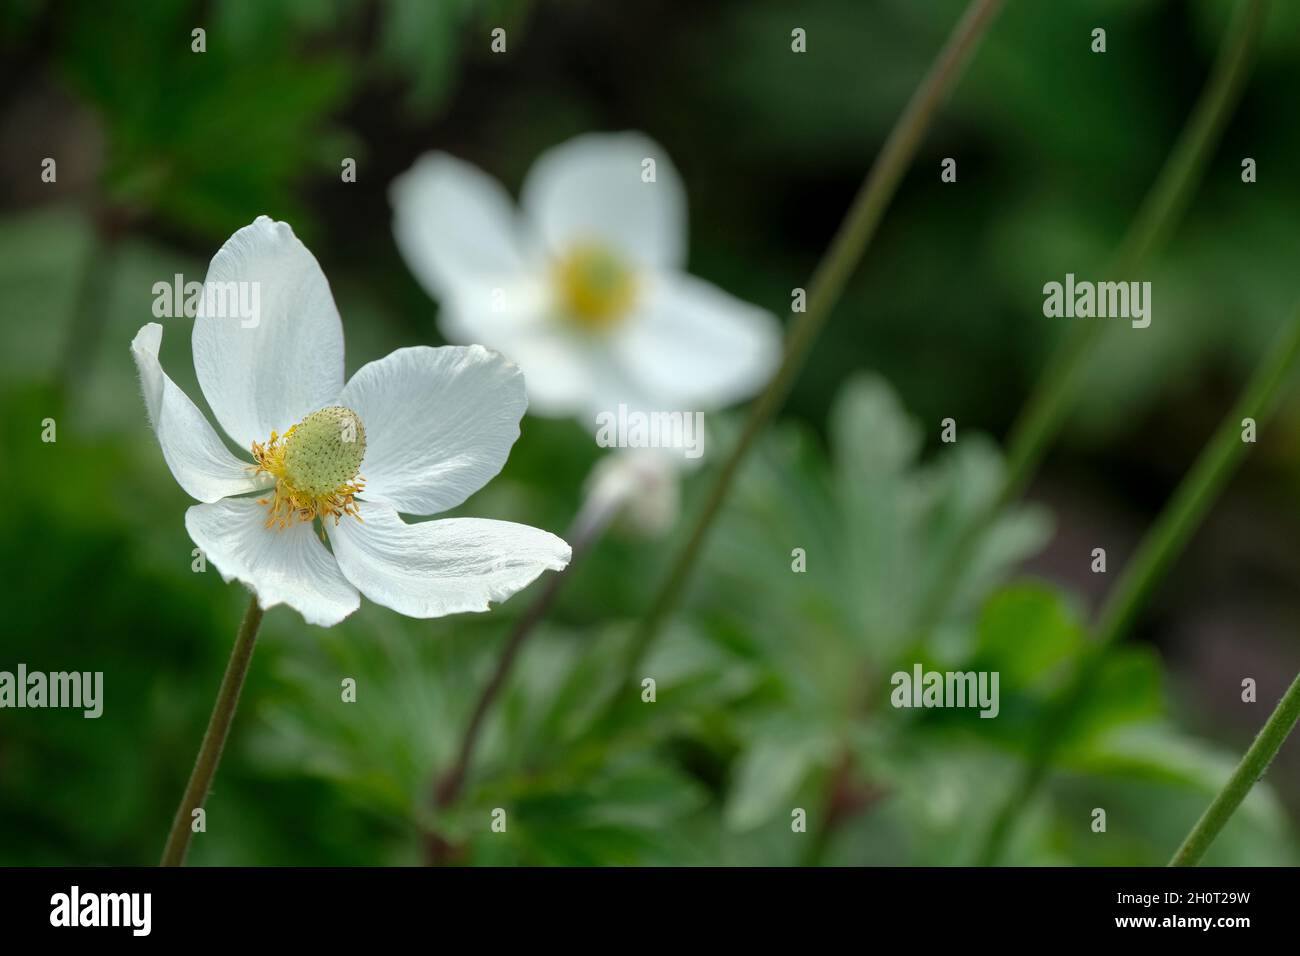 Anemonoides sylvestris, known as snowdrop anemone or snowdrop windflower. White flowers, late summer Stock Photo